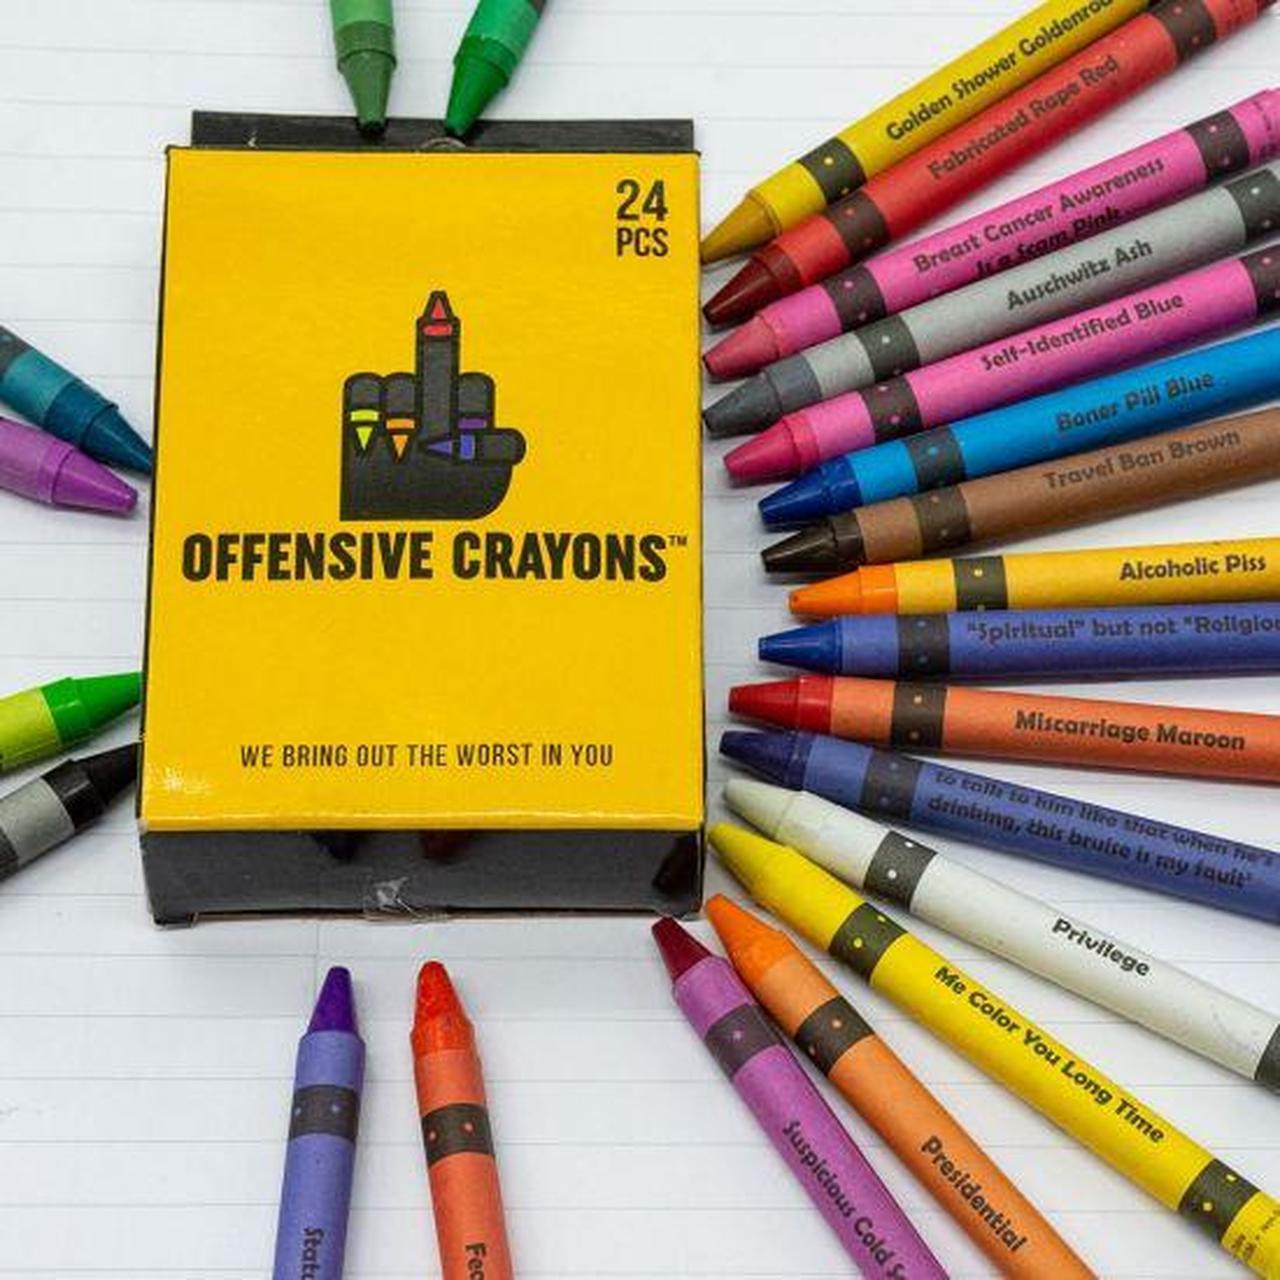 Offensive Crayons - The Original